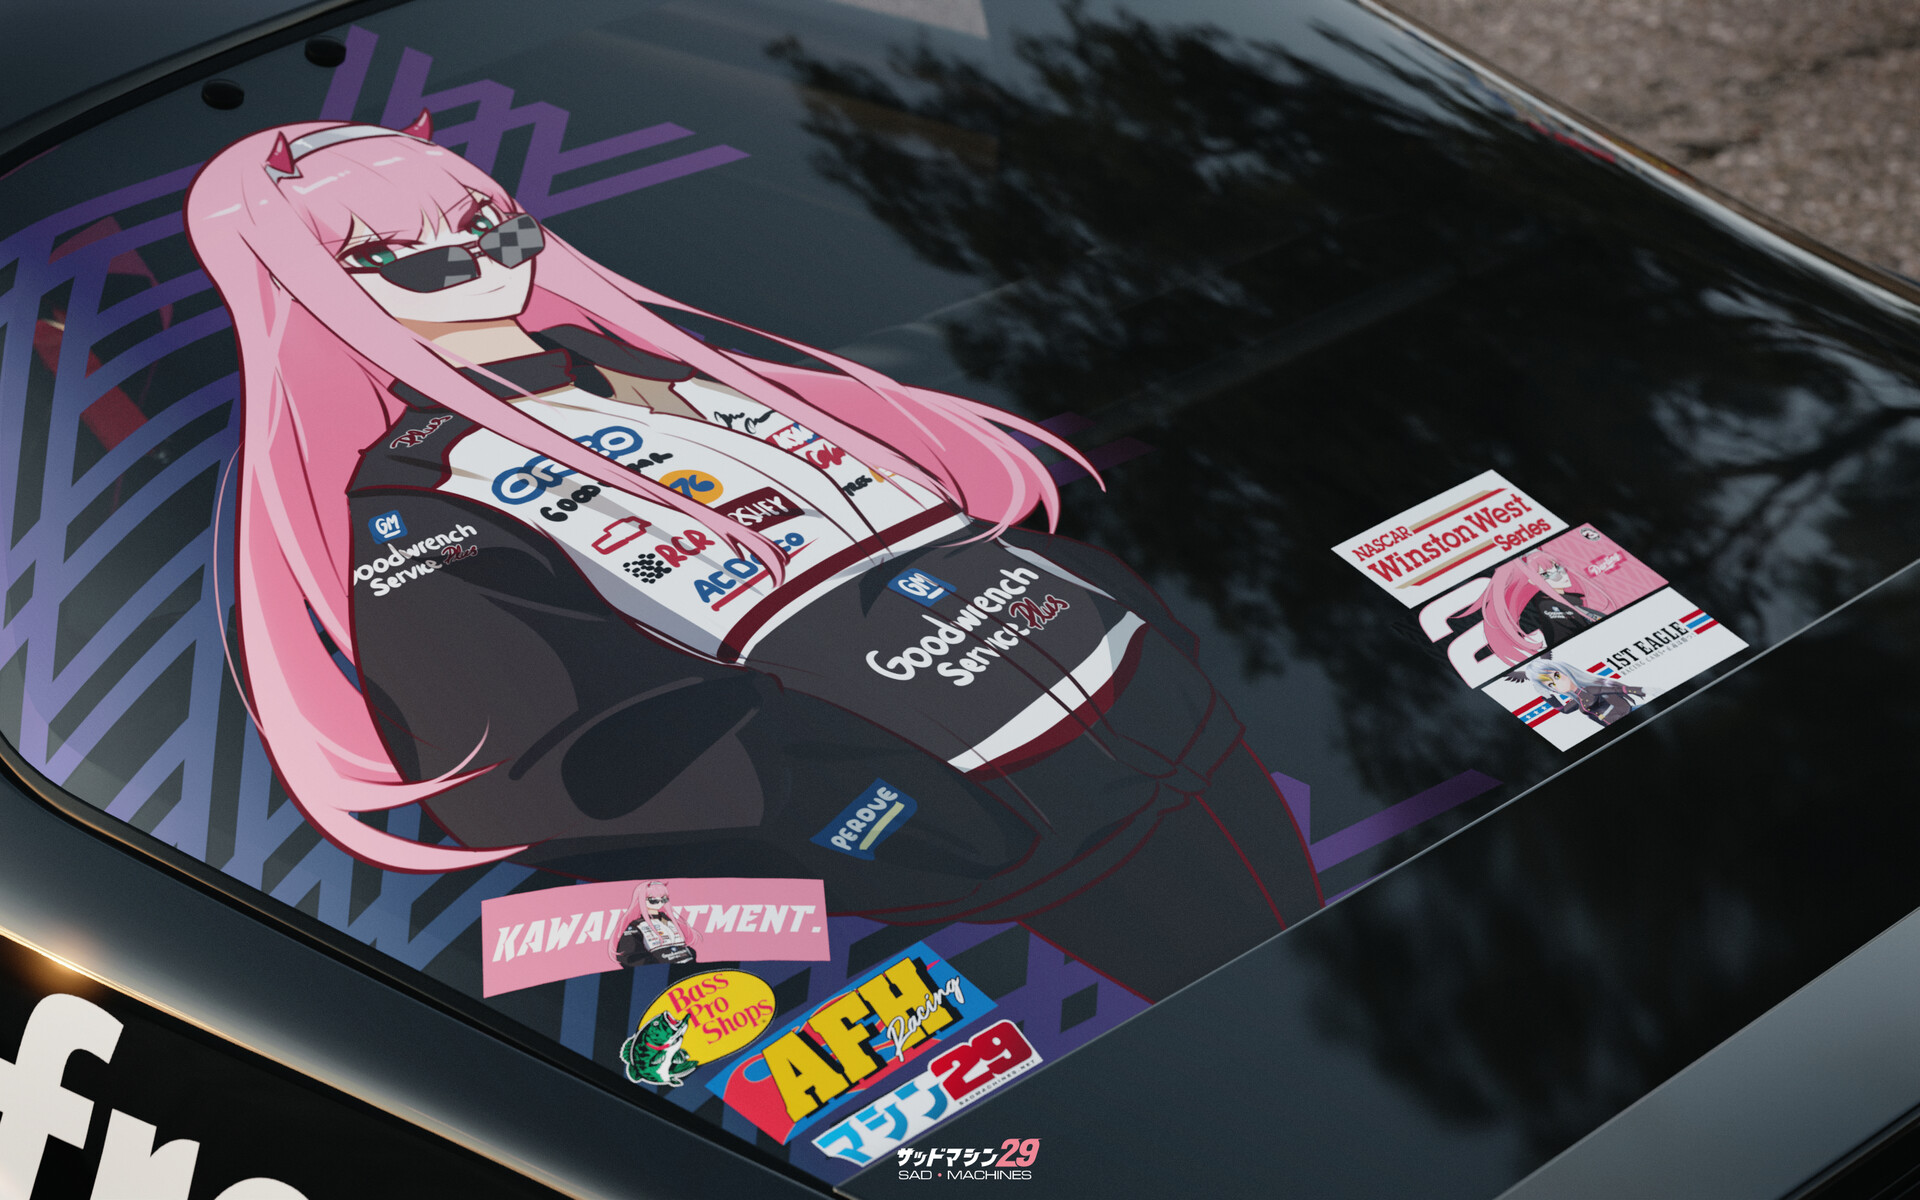 This is as rare moment when an Anime like Yu-Gi-Oh sponsors a NASCAR race  car, The anime was in the height of popularity back then. When will we see  a paint scheme